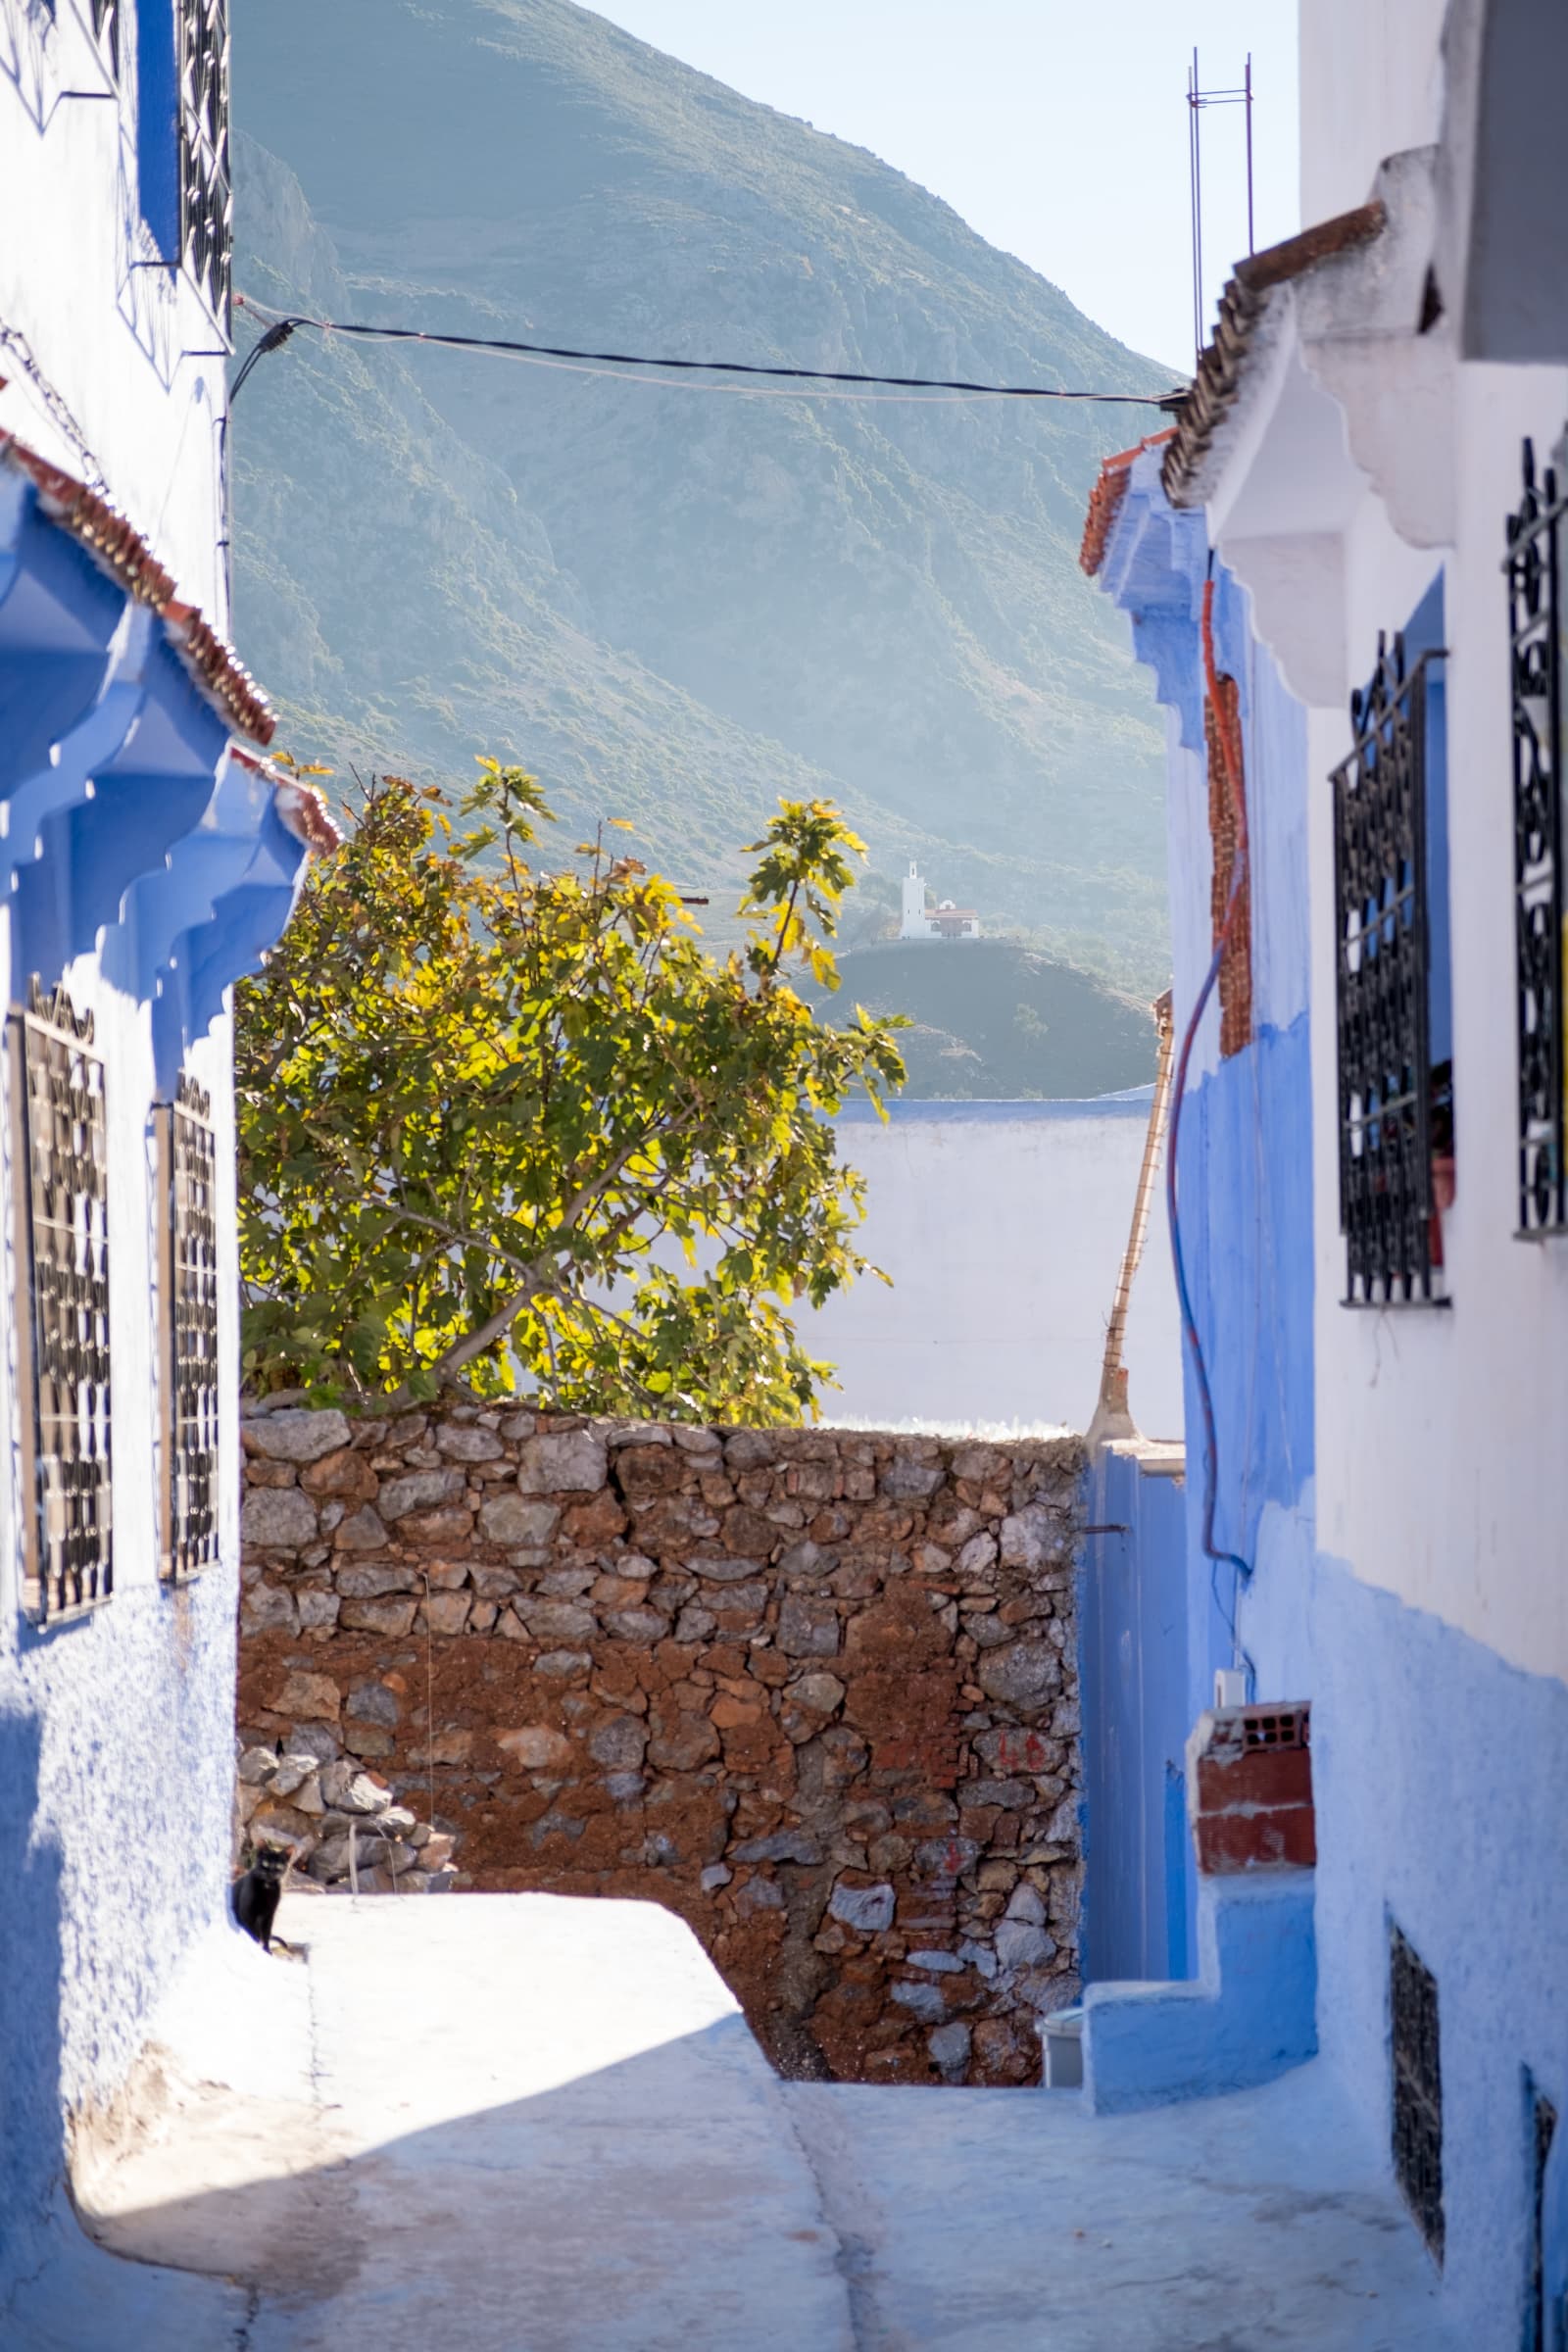 Looking over to the Spanish Mosque from a side street in Chefchaouen, Morocco